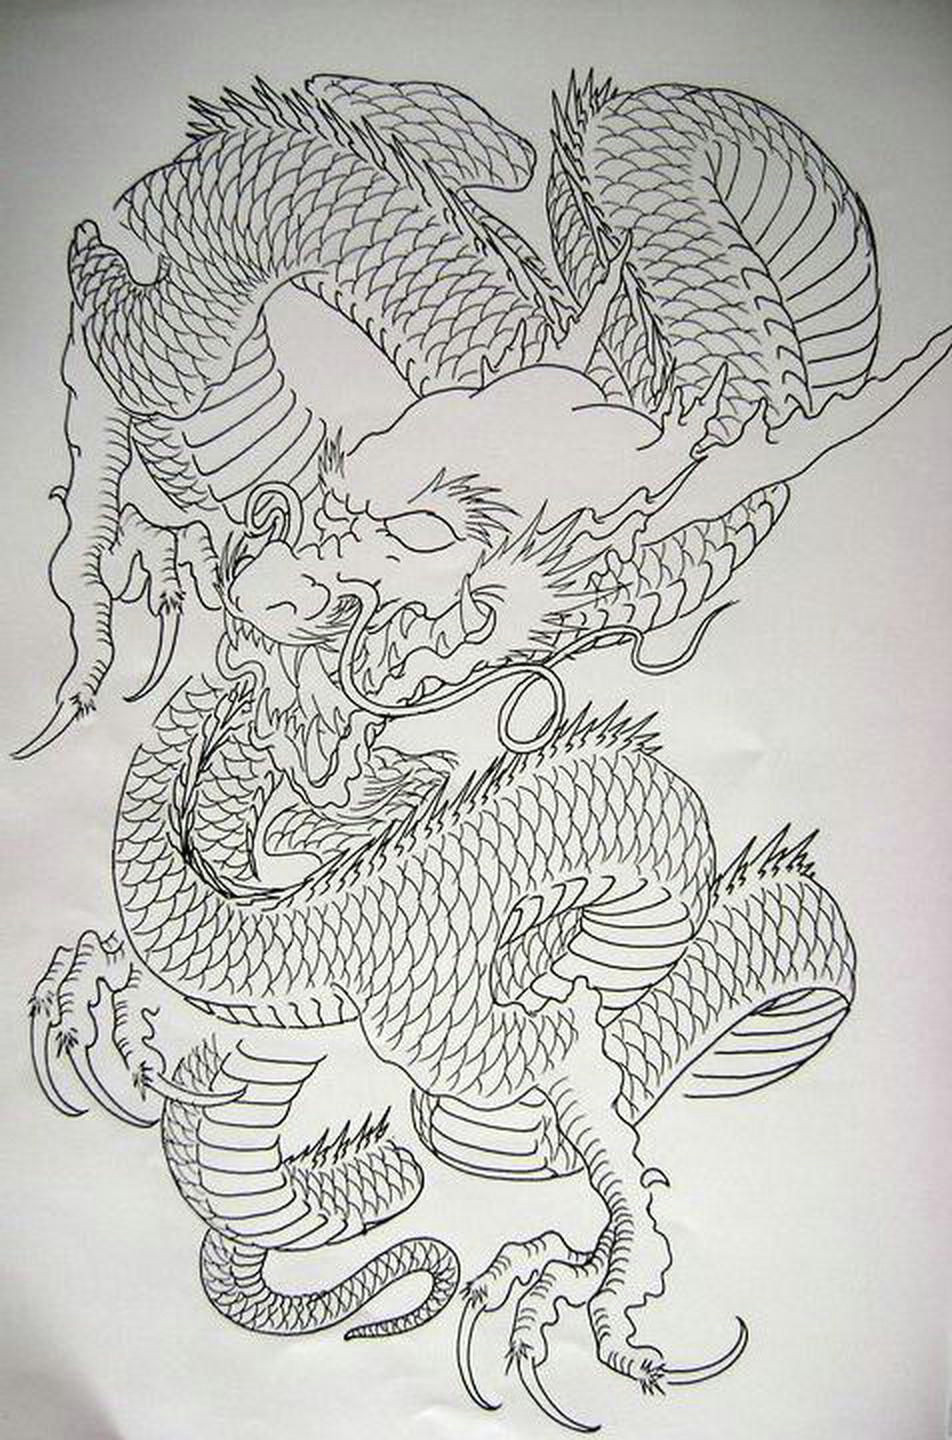 Outline Drawings Of Dragons Pin by anderson Duarte On Gueixas Pinterest Dragons Books and